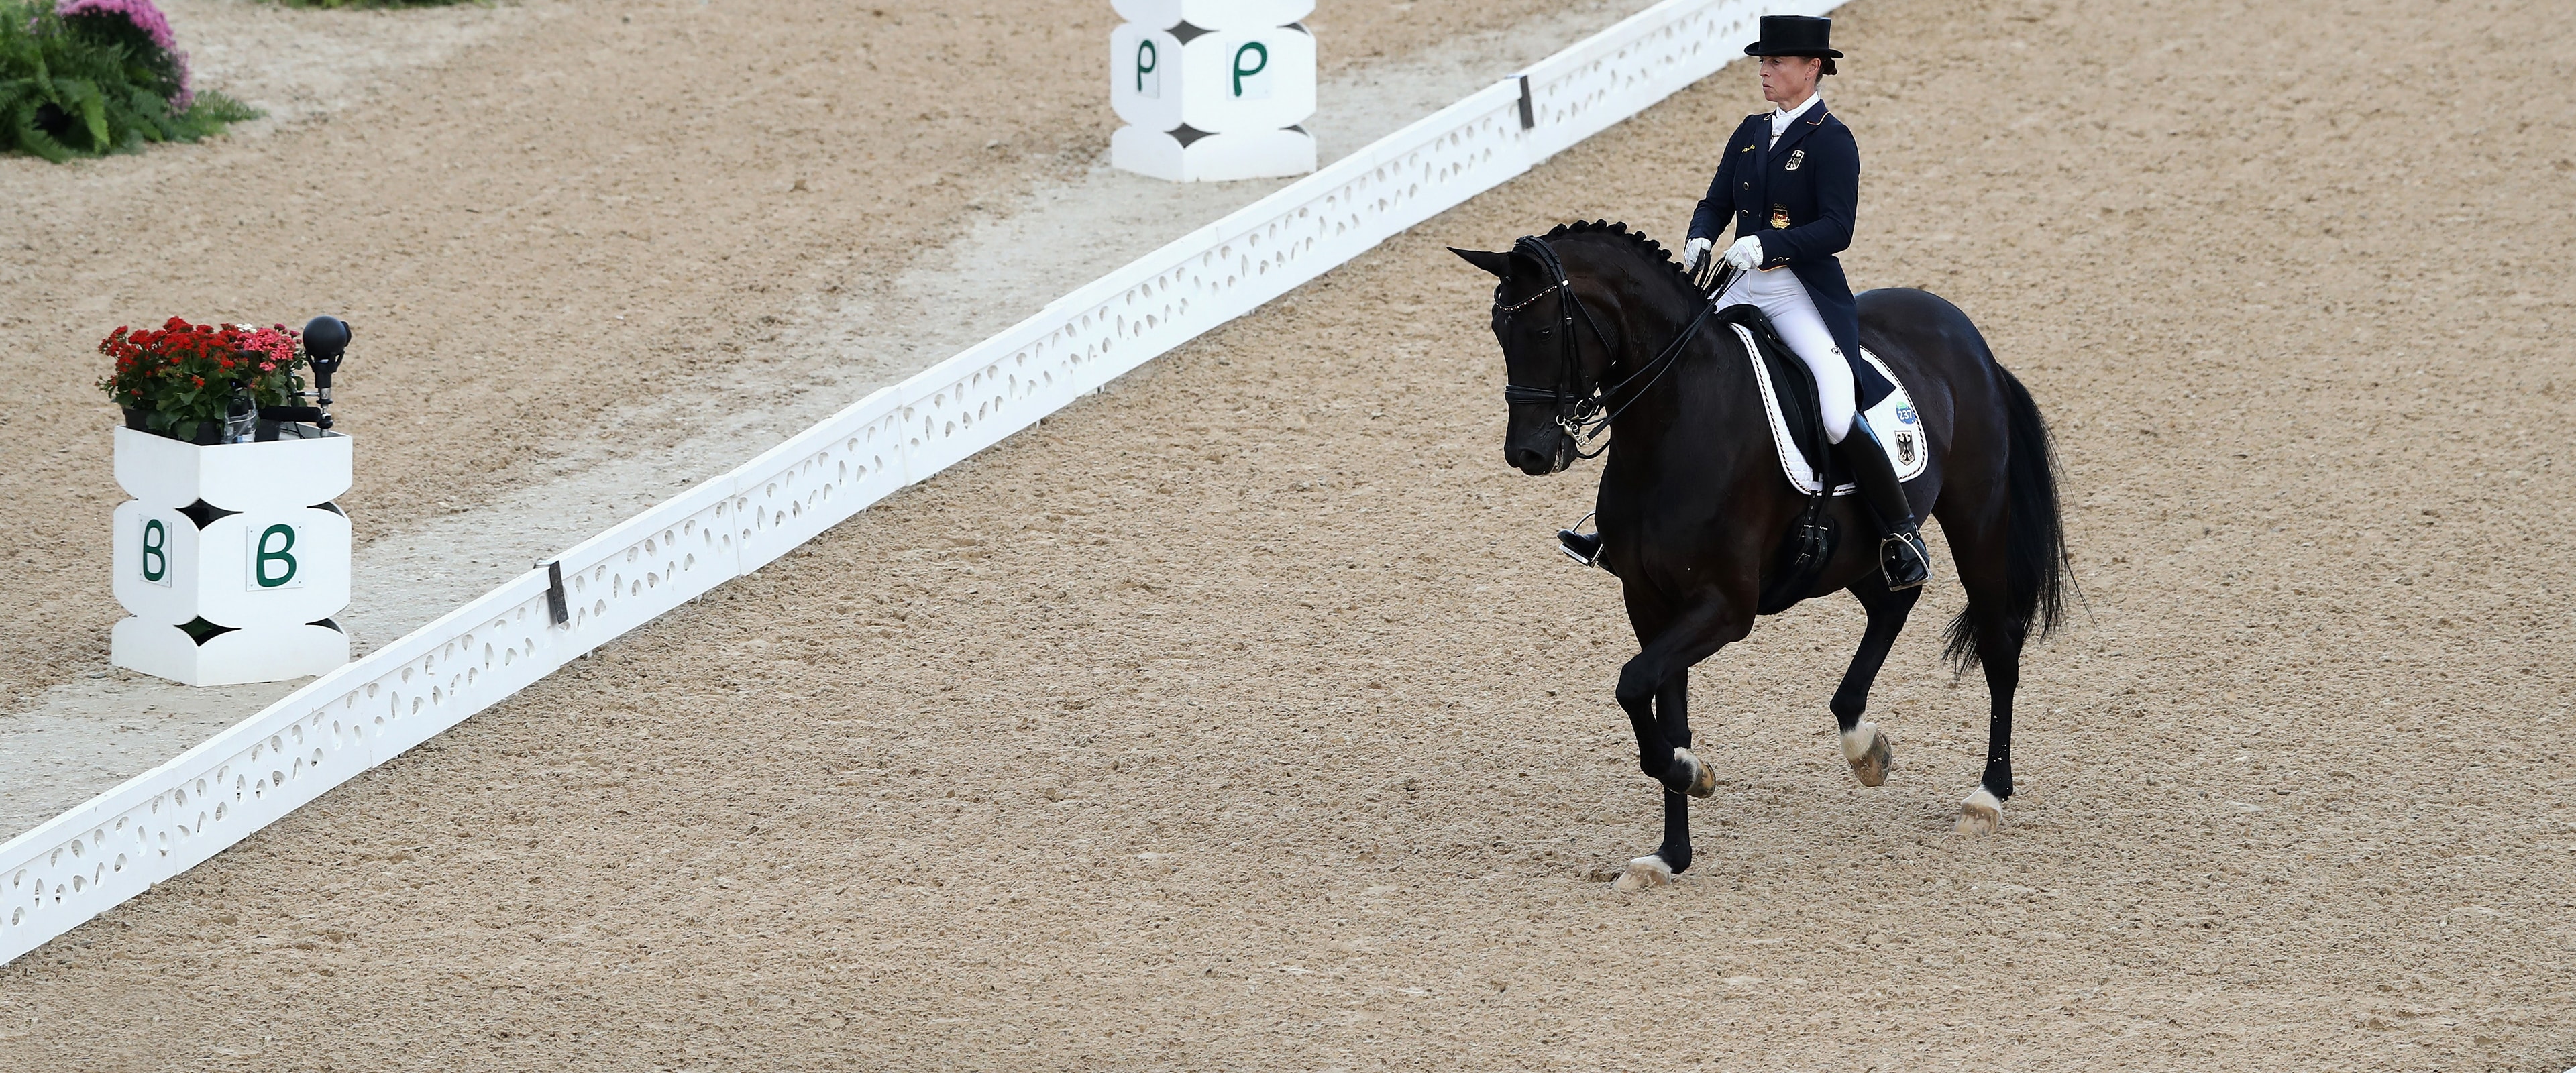 Dressage legend Isabell Werth and her horses Olympic News